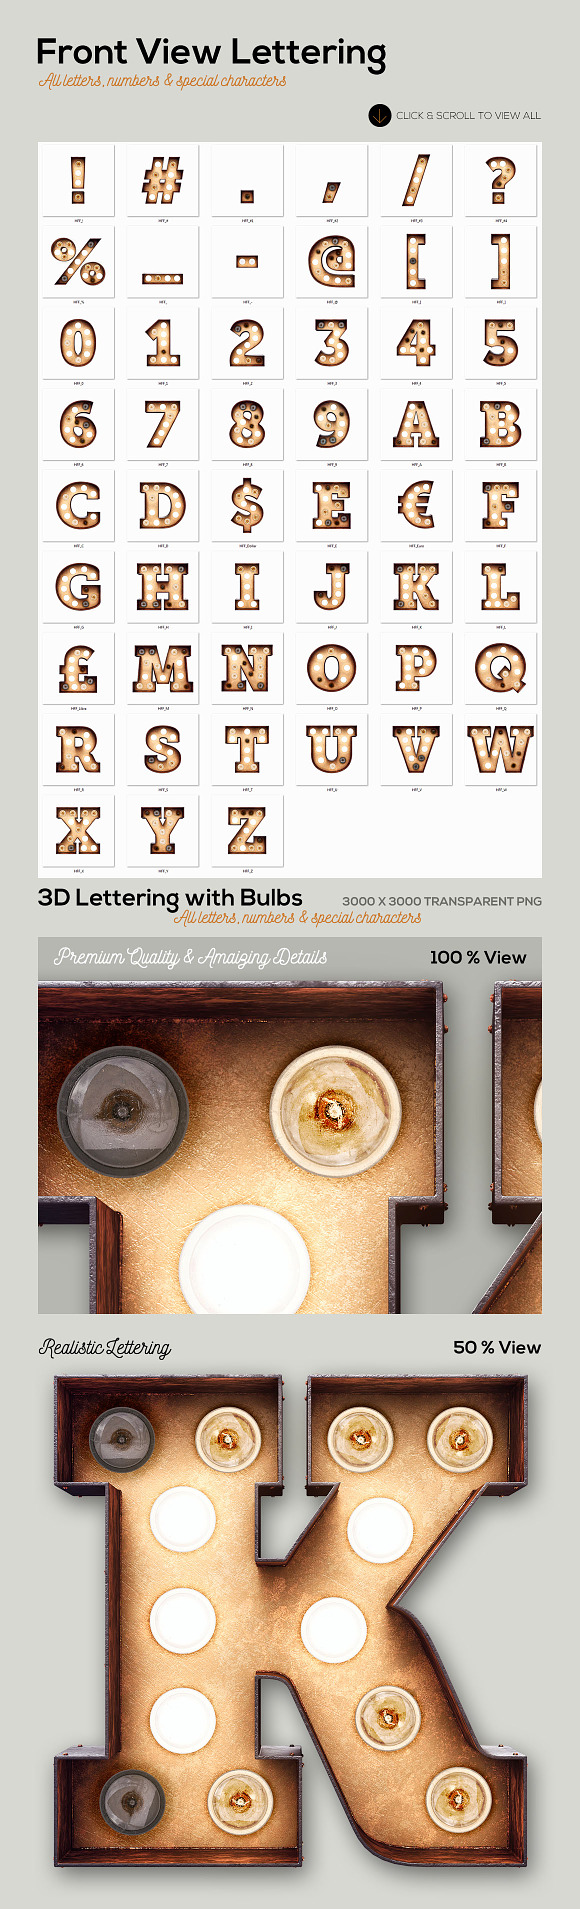 3 Light Bulbs 3D Letterings in Graphics - product preview 8